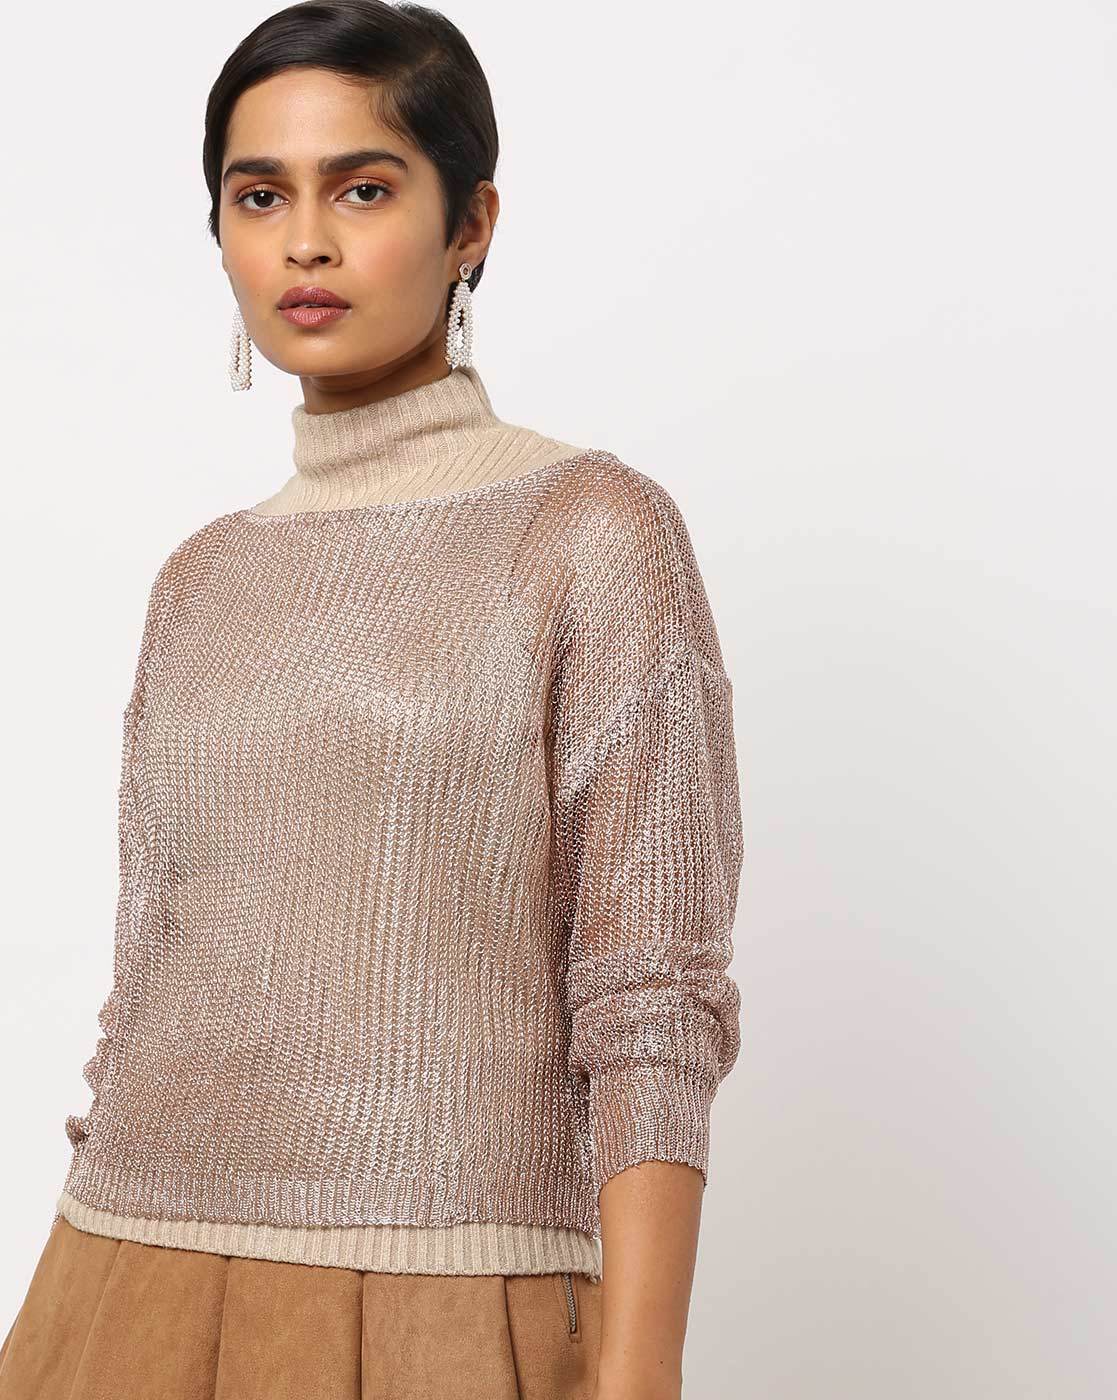 Tanu Recommends : TRENDS Textured Sweater with Drop Shoulder Sleeves